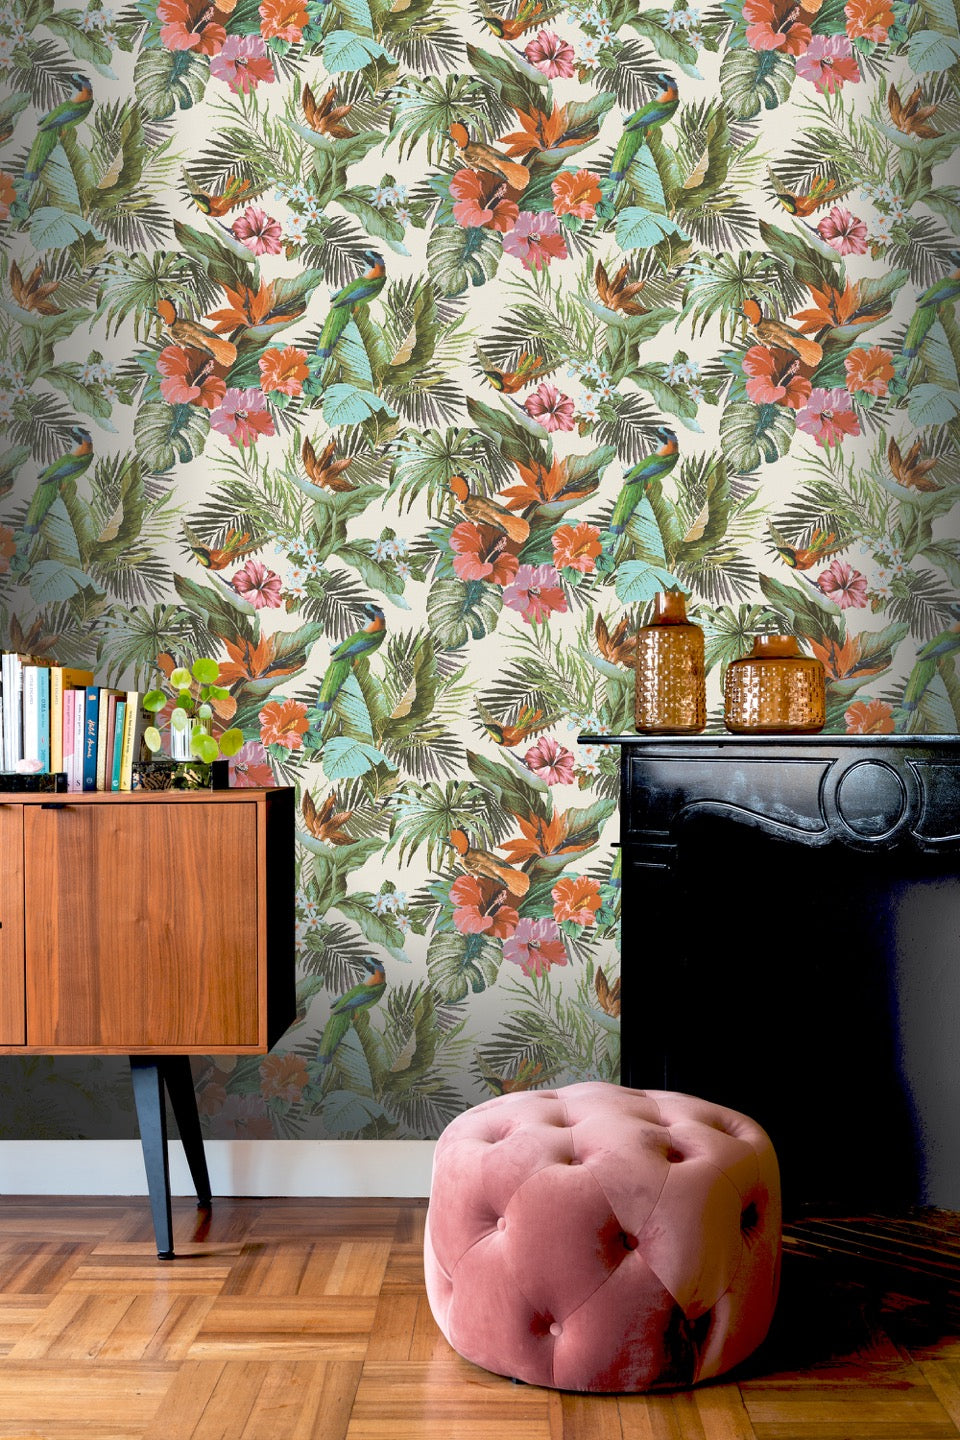 vh53900066r Beautiful deep engraved tropical paradise design with gorgeous colourful leaves, flowers and birds. Heavy weight italian vinyl. Supreme quality